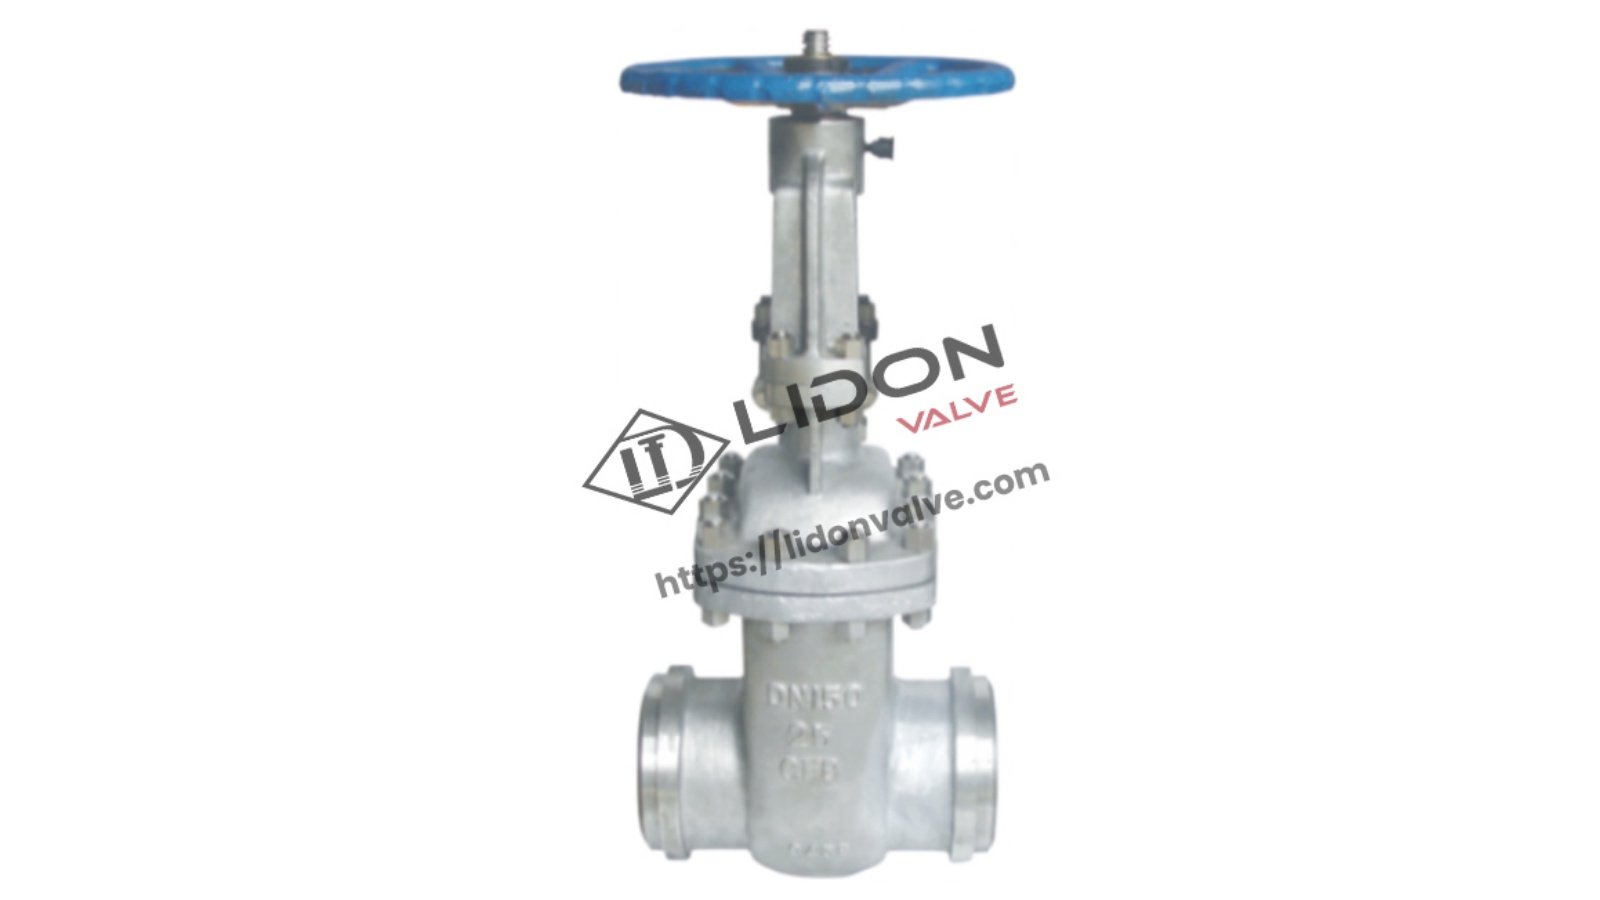 Double Disc Gate Valve Supplier: Everything You Need to Know